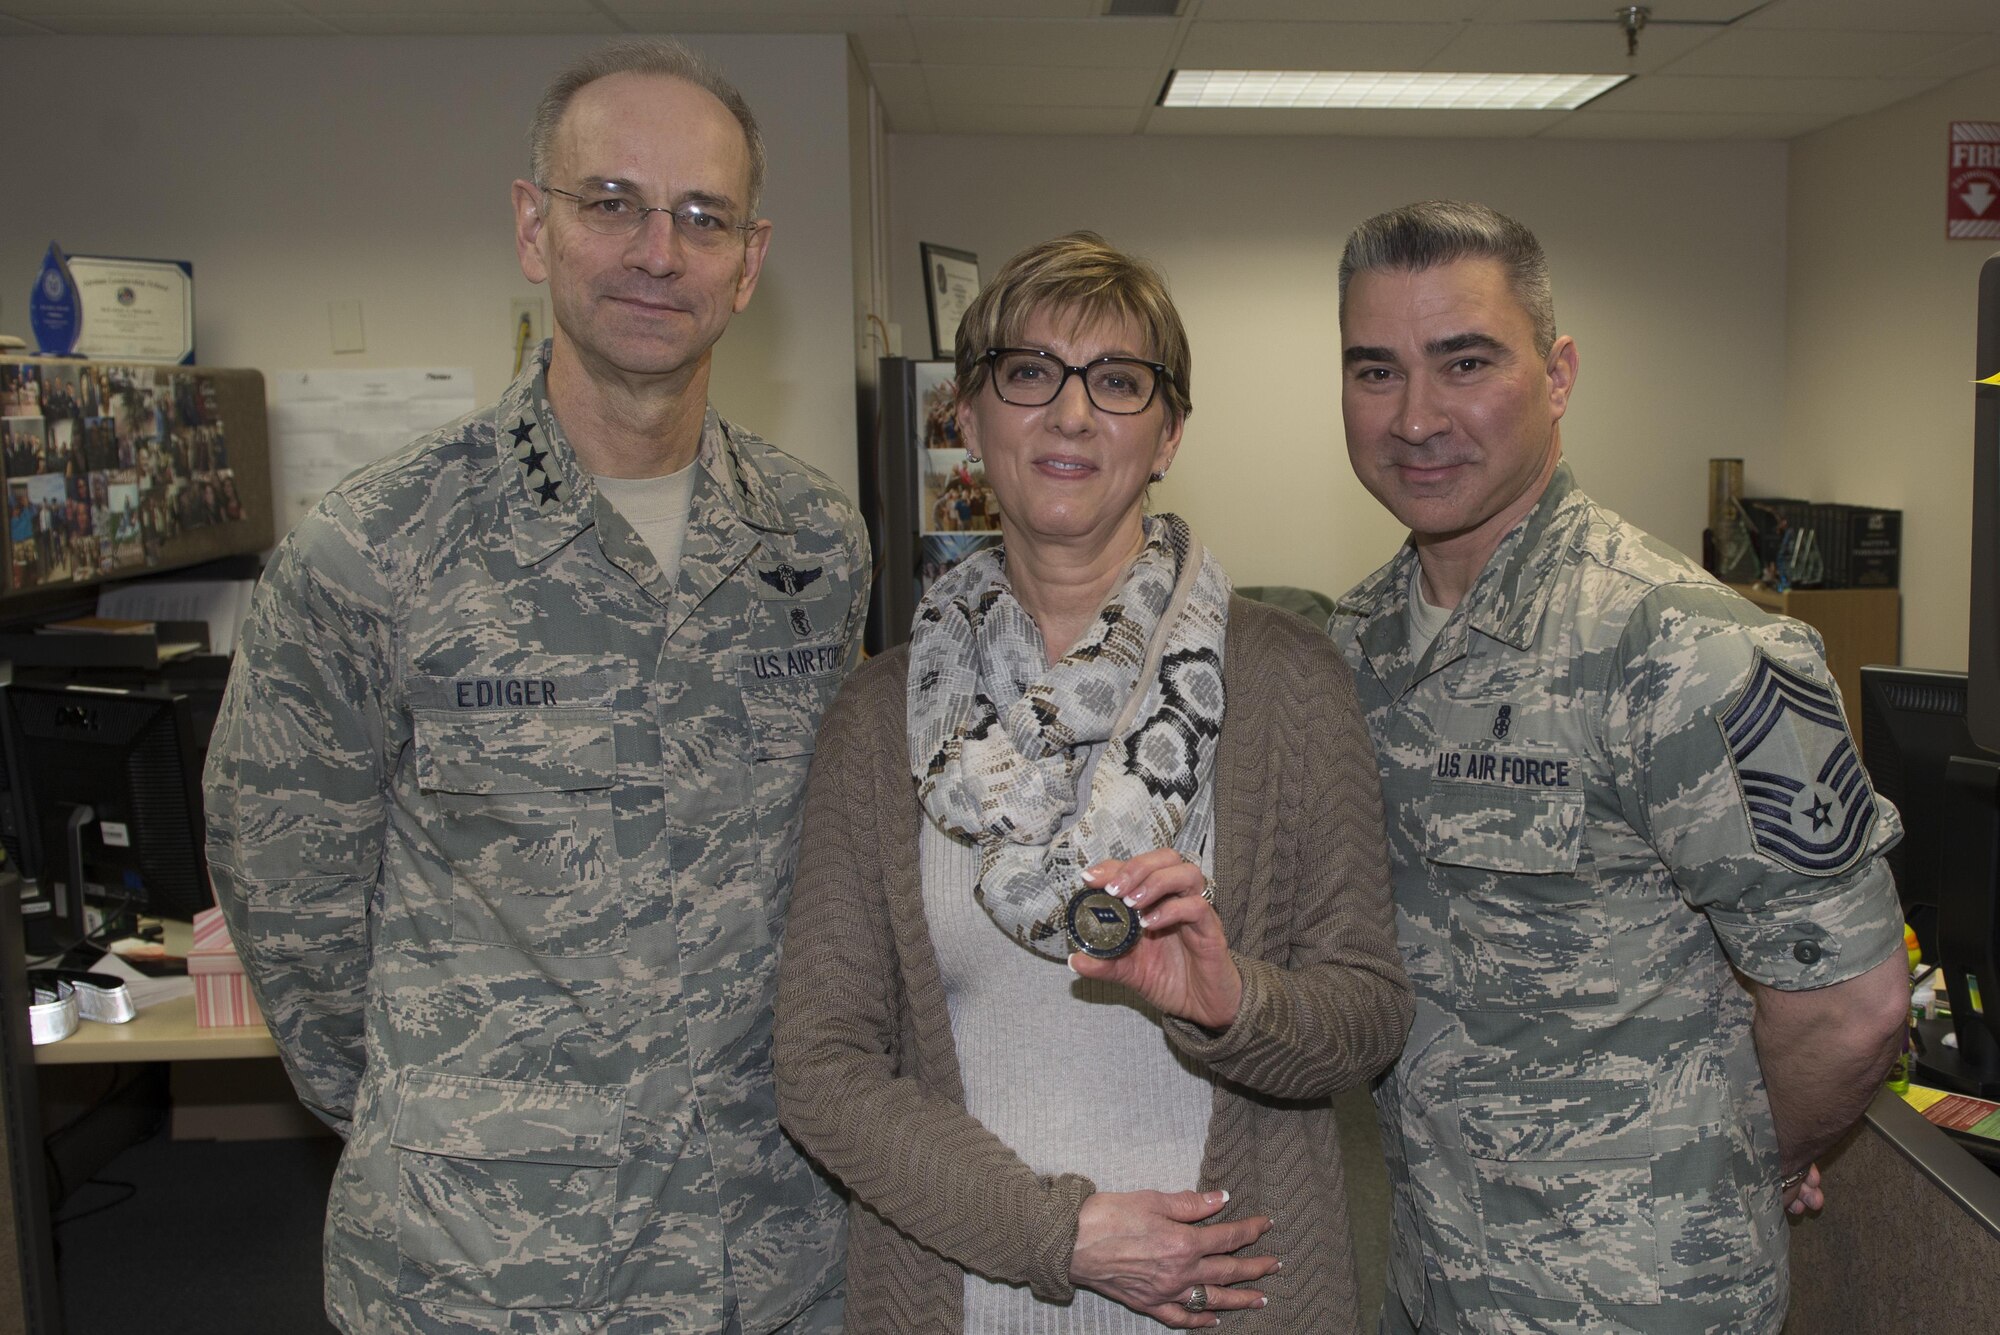 U.S. Air Force Lt. Gen. Mark Ediger, the Air Force surgeon general, Kathleen Lelevier, the 354th Medical Group bioenvironmental water program manager, and Chief Master Sgt. Edward Pace, the Medical Enlisted Forces chief, pose for a photo, March 10, 2017 at Eielson Air Force Base, Alaska. Ediger recognized Lelevier for her commitment to improving local water supplies. (U.S. Air Force photo by Airman Eric M. Fisher)